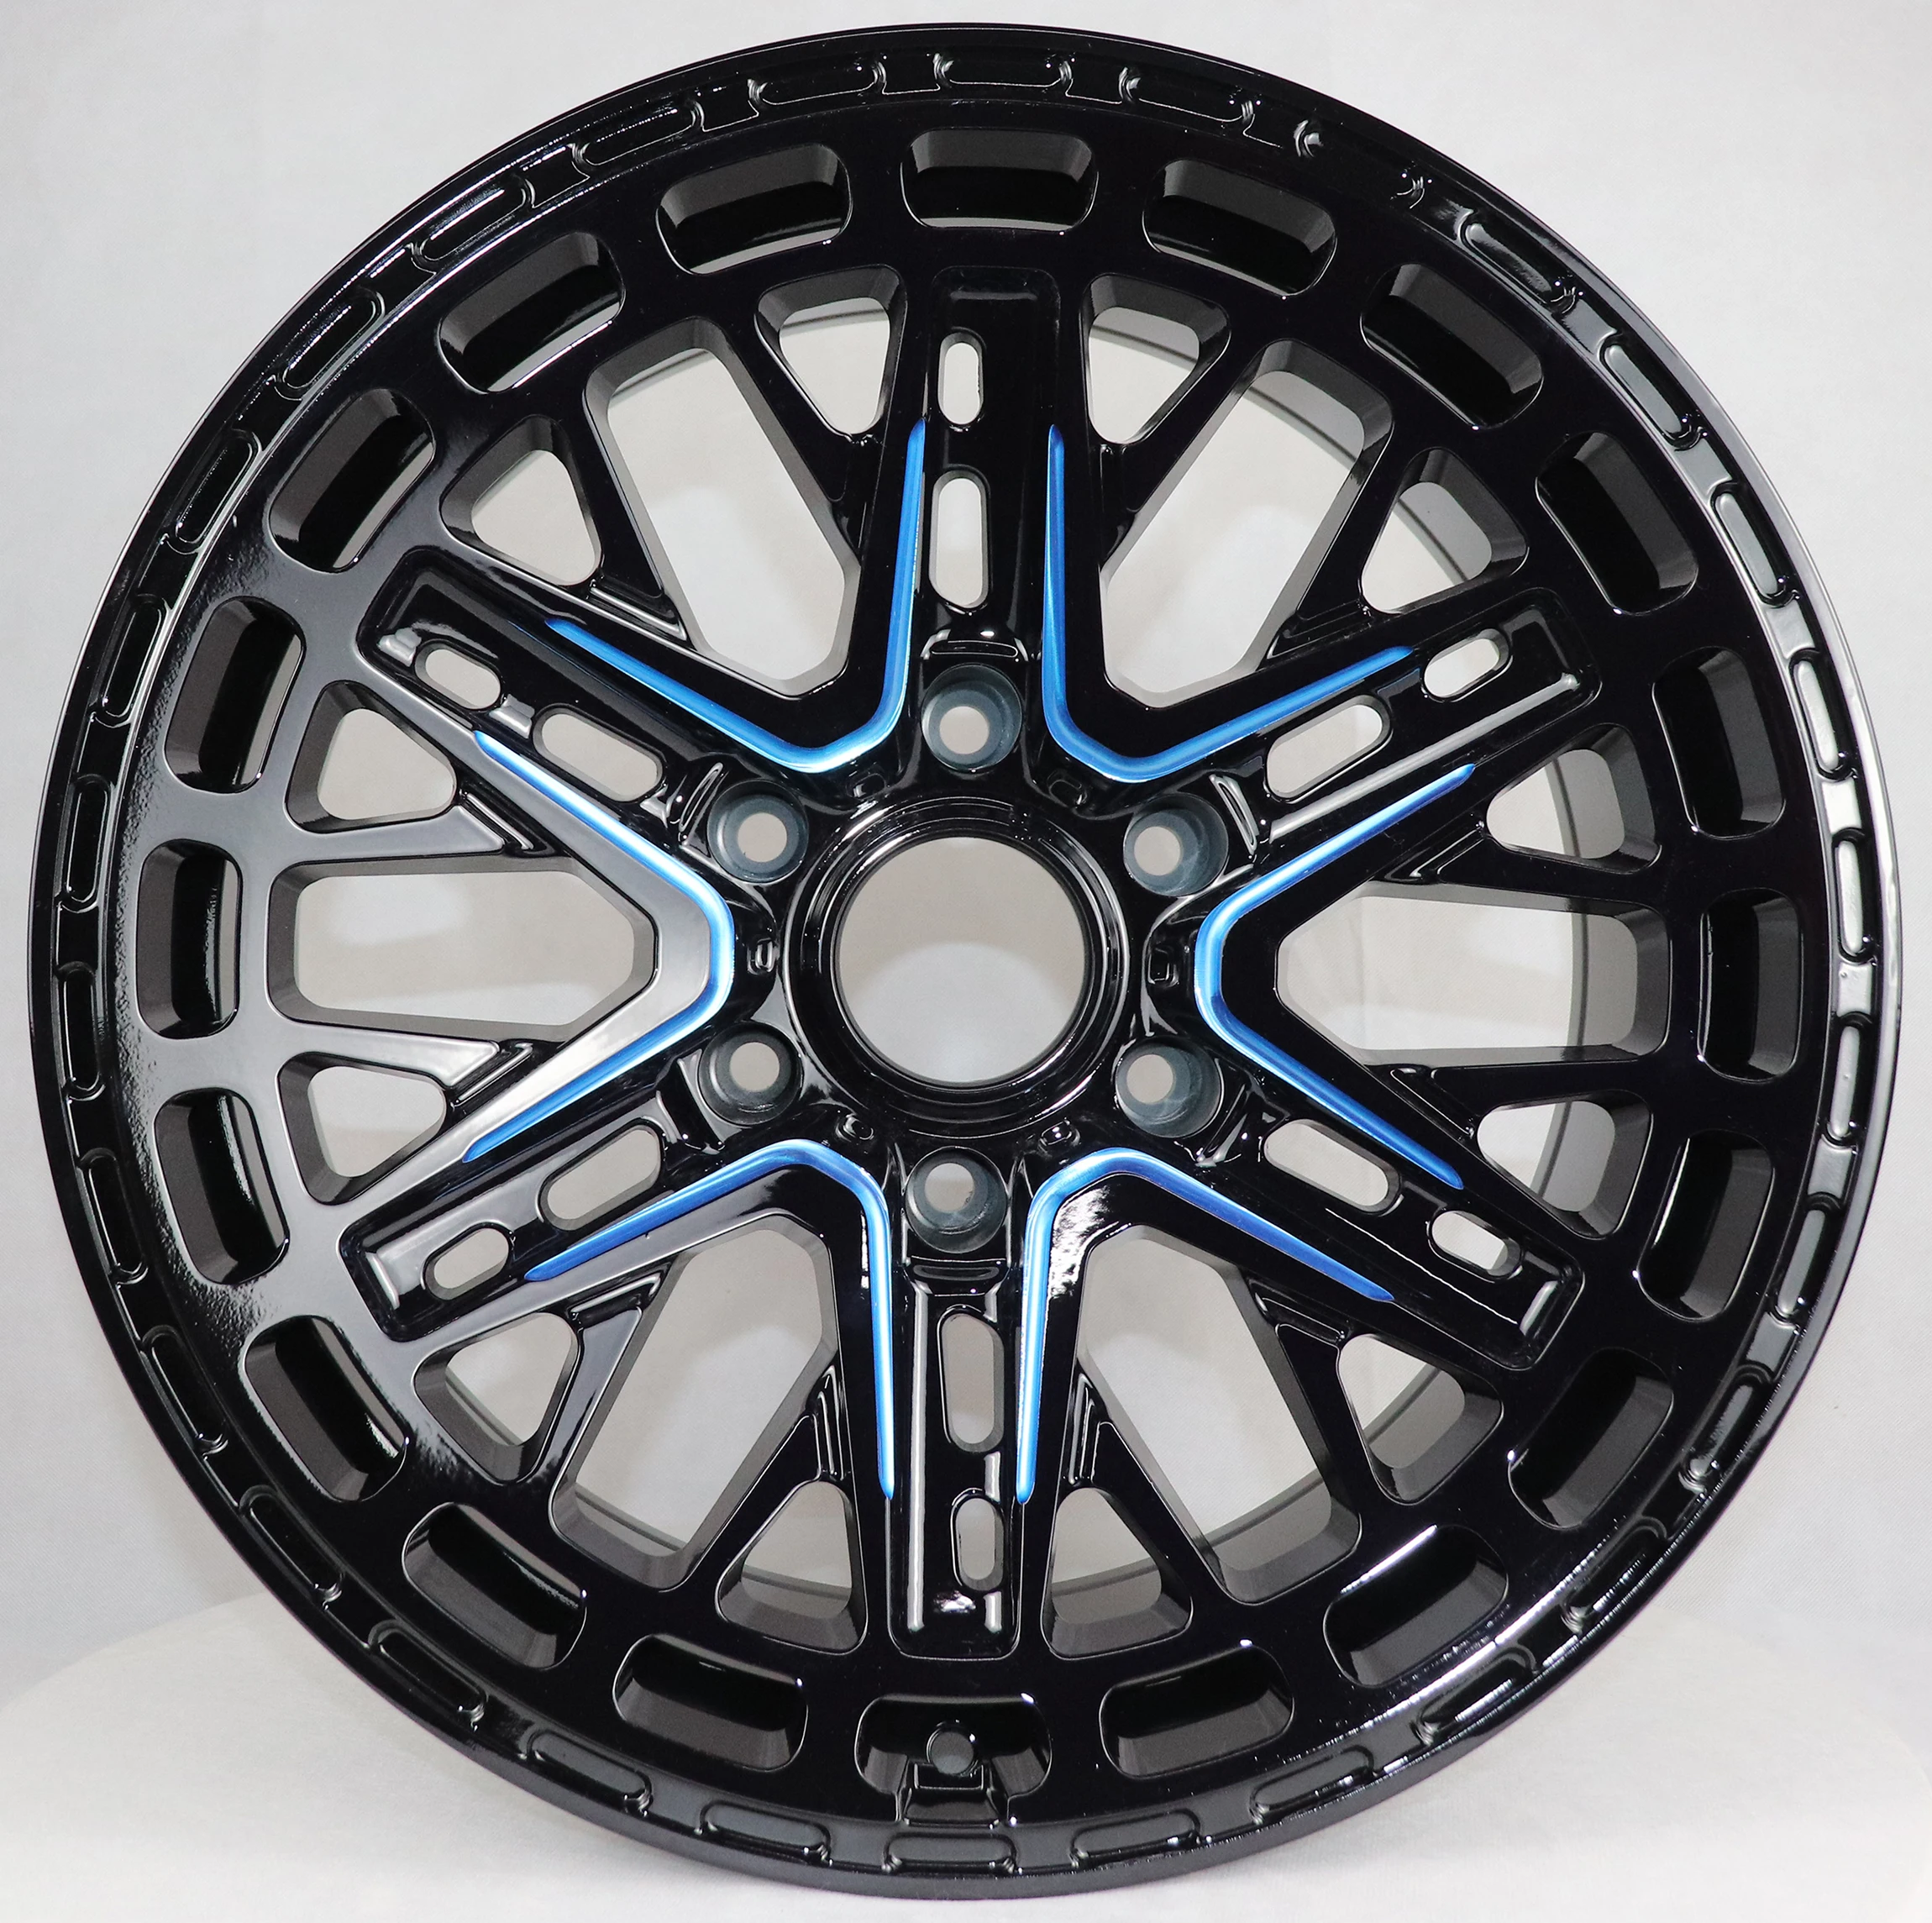 

Outdoor Sports offroad wheels r18 6x1397 off road rims 4x4 suv off-road wheel 18 inch alloy rines